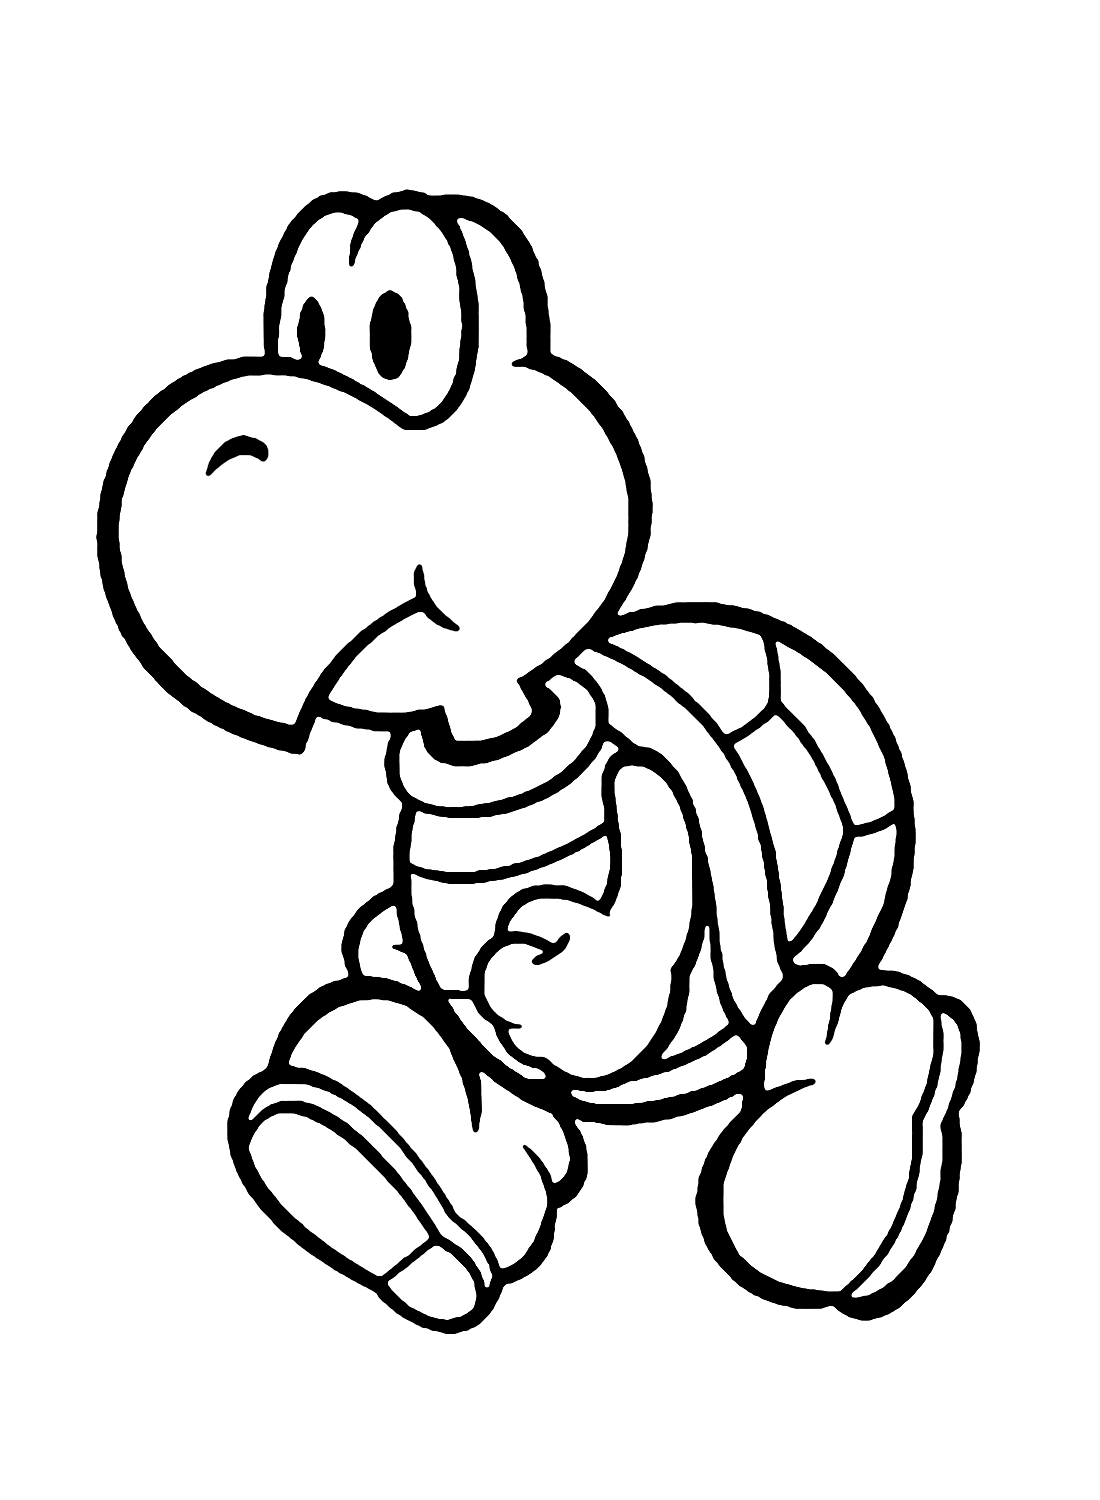 Koopa Troopa Coloring Pages - Coloring Pages For Kids And Adults